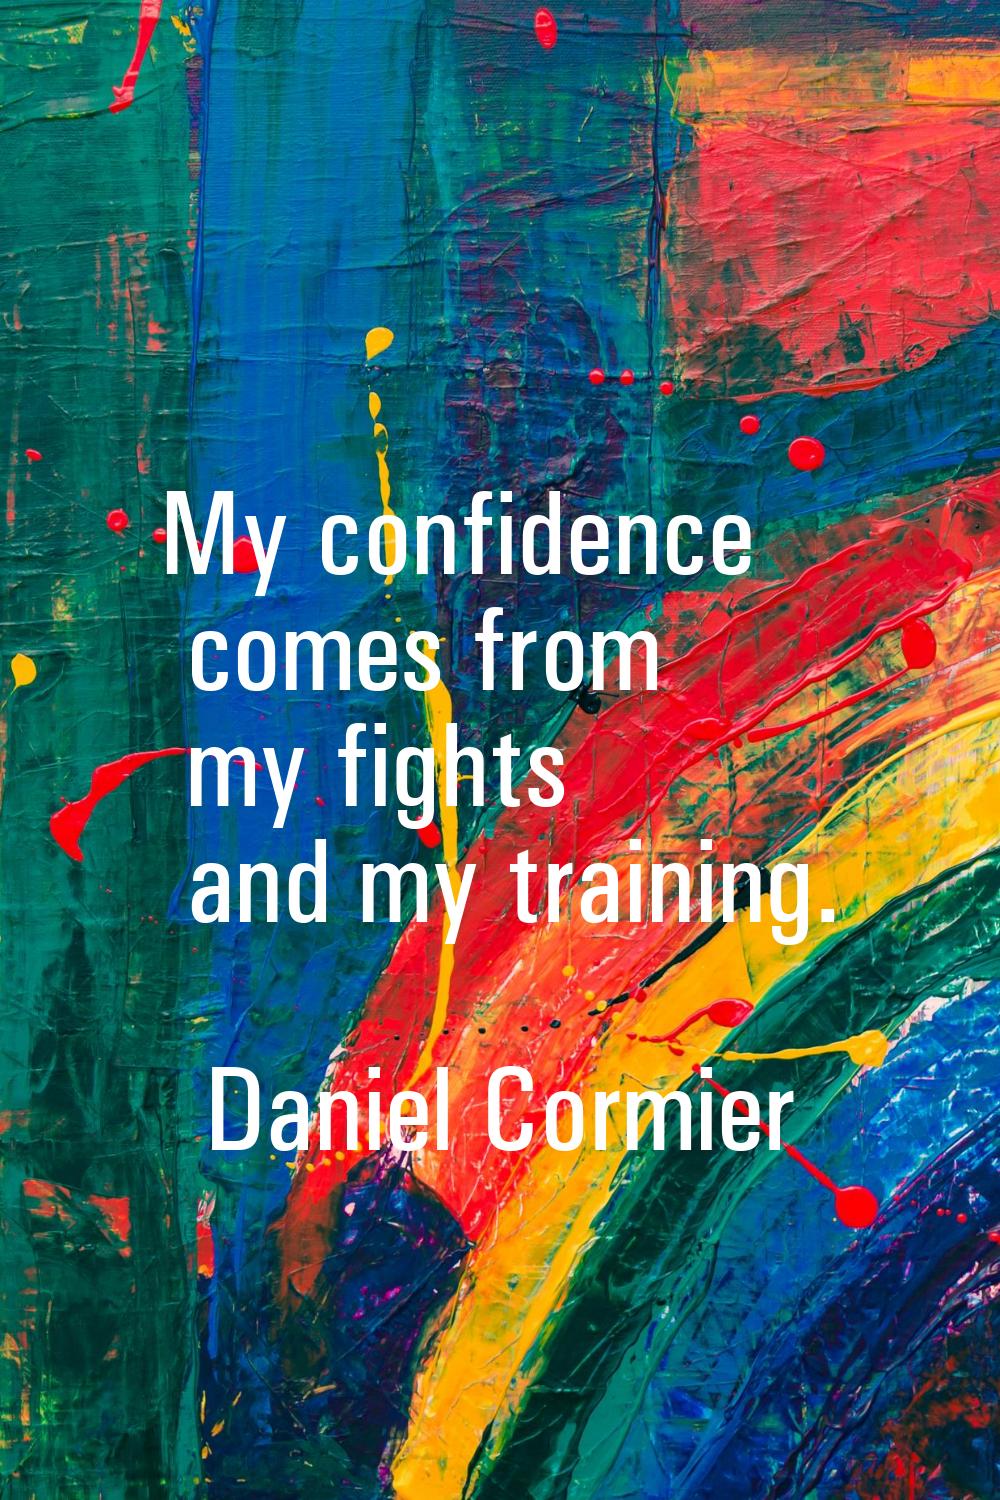 My confidence comes from my fights and my training.